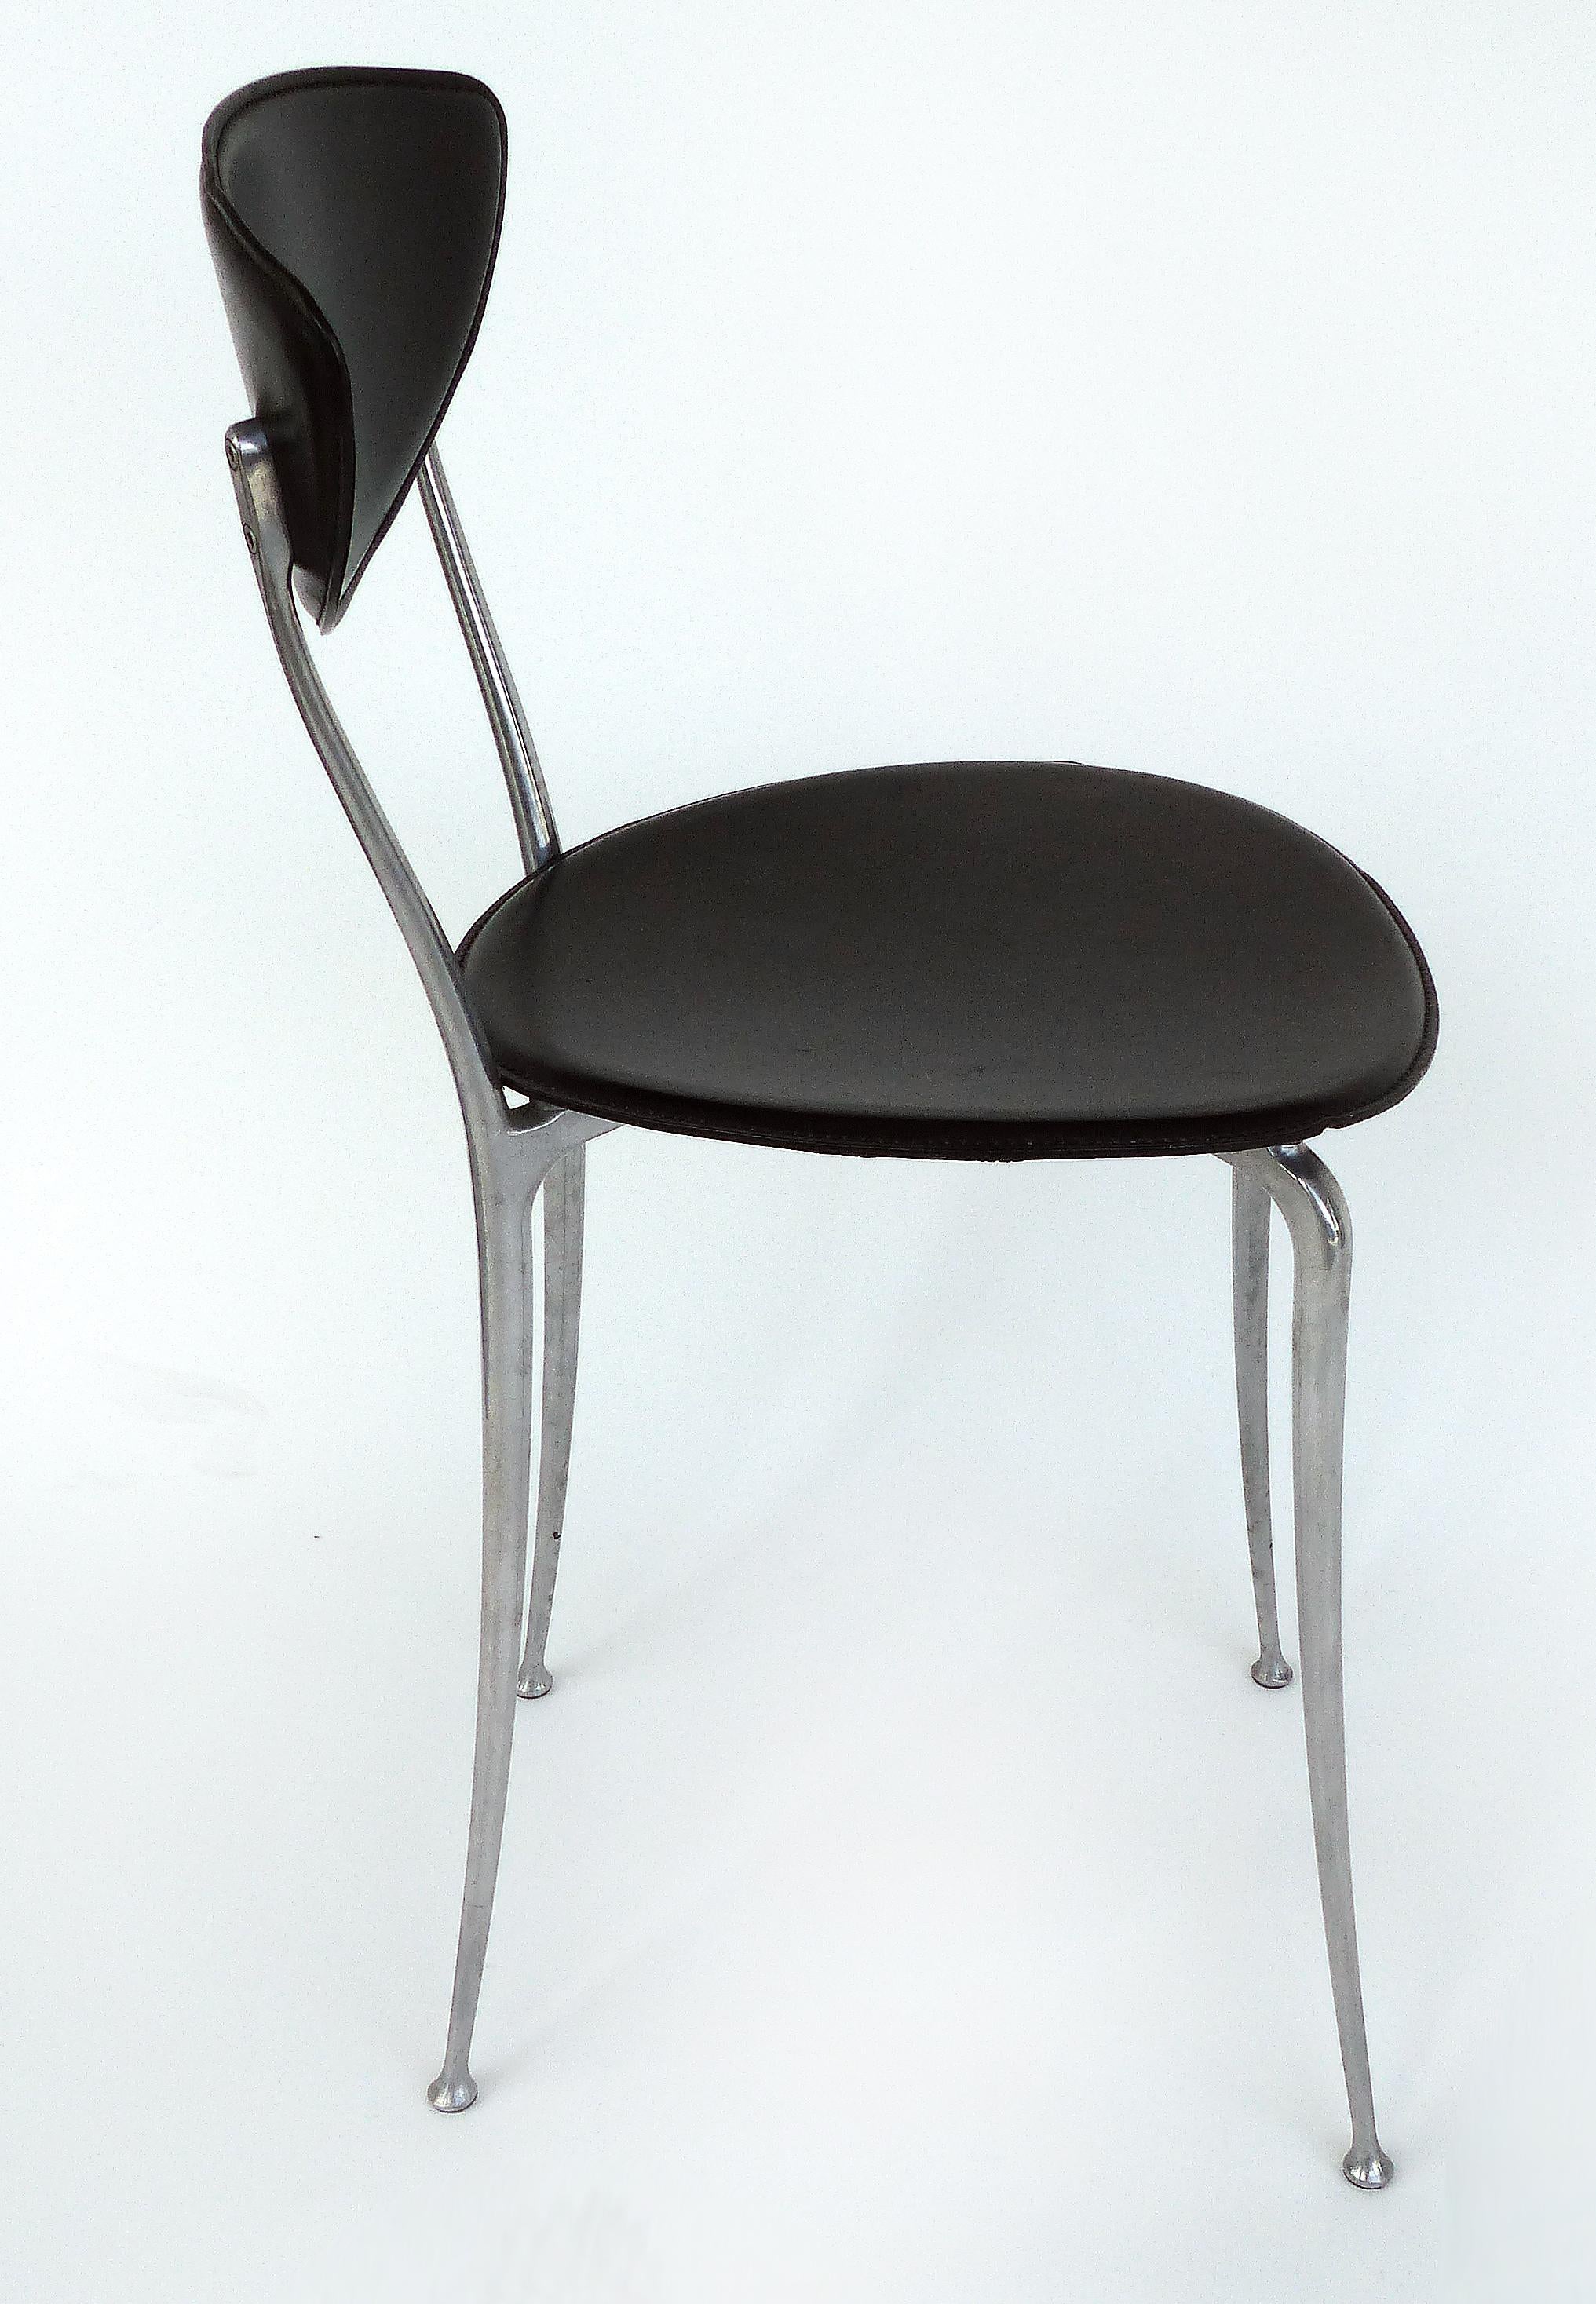 arper chairs for sale